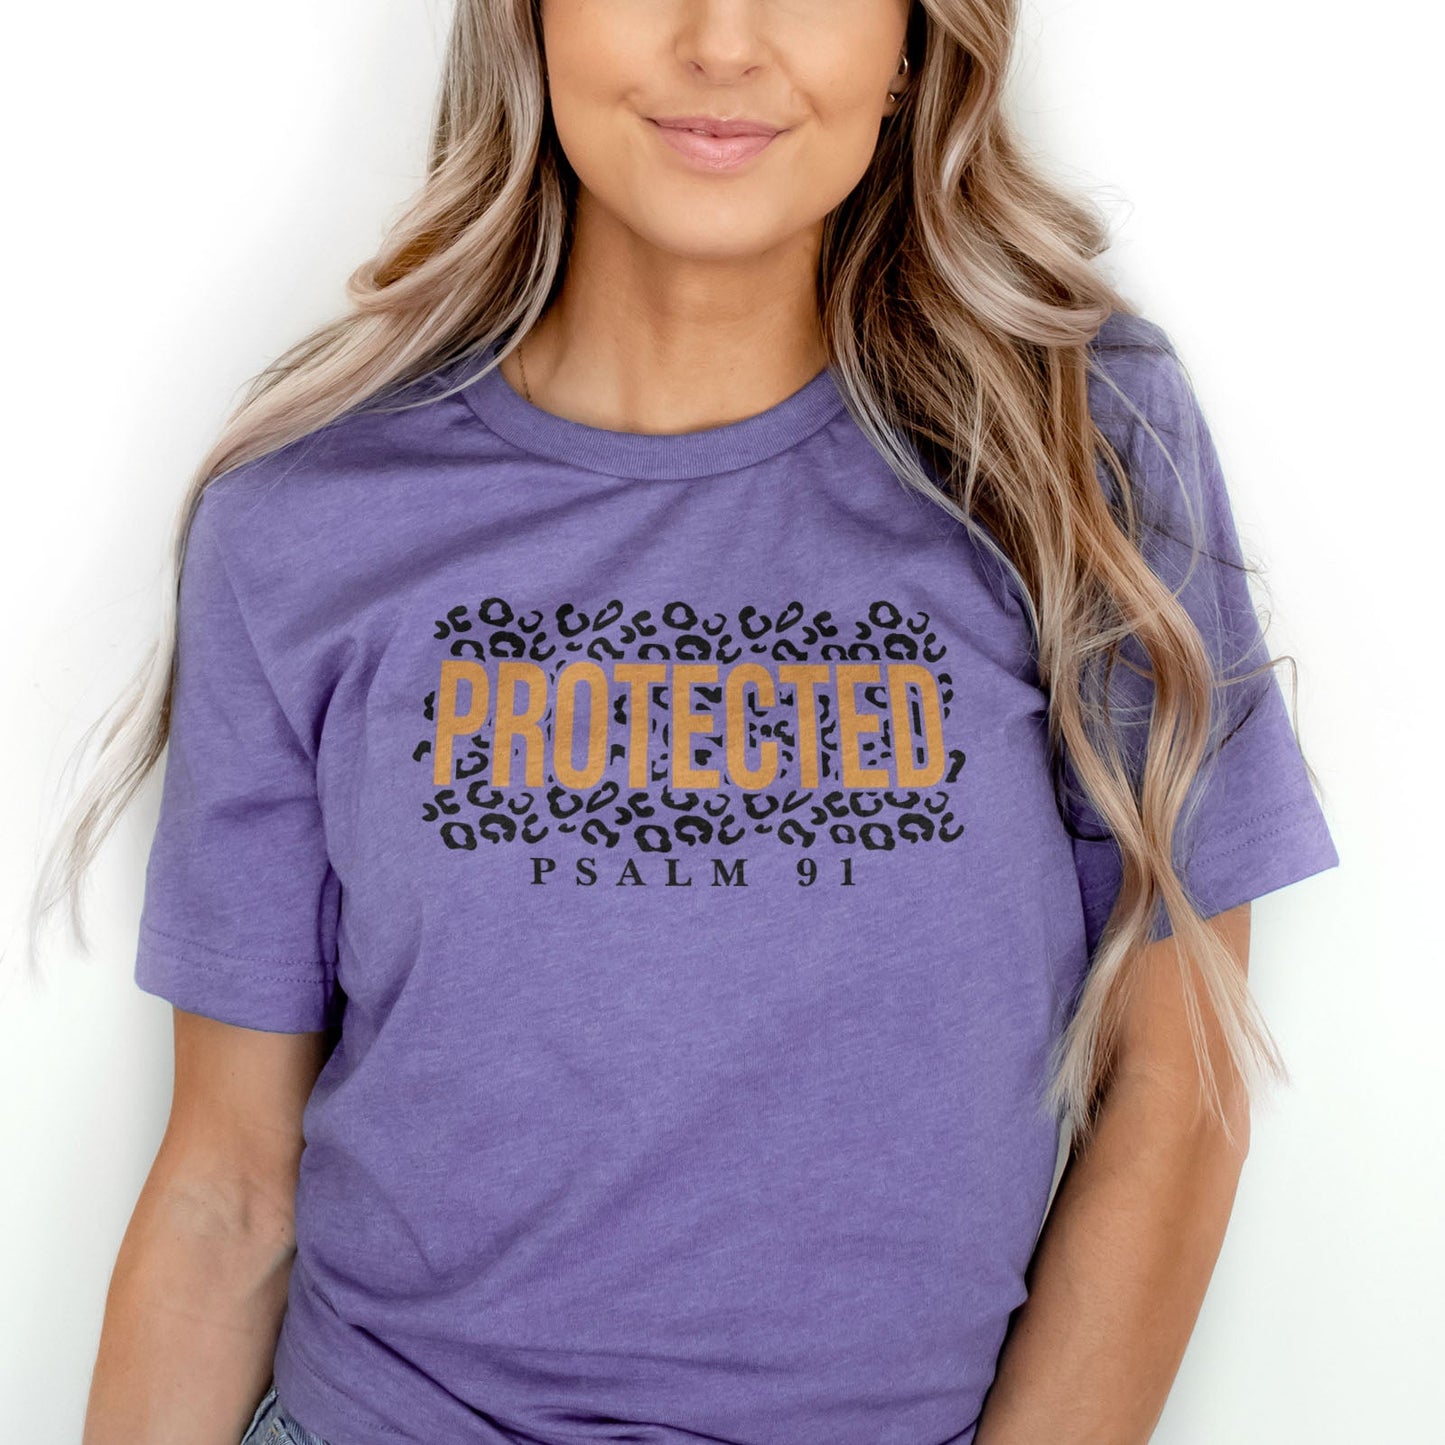 Protected Leopard Psalm 91 Tee Shirts For Women - Christian Shirts for Women - Religious Tee Shirts